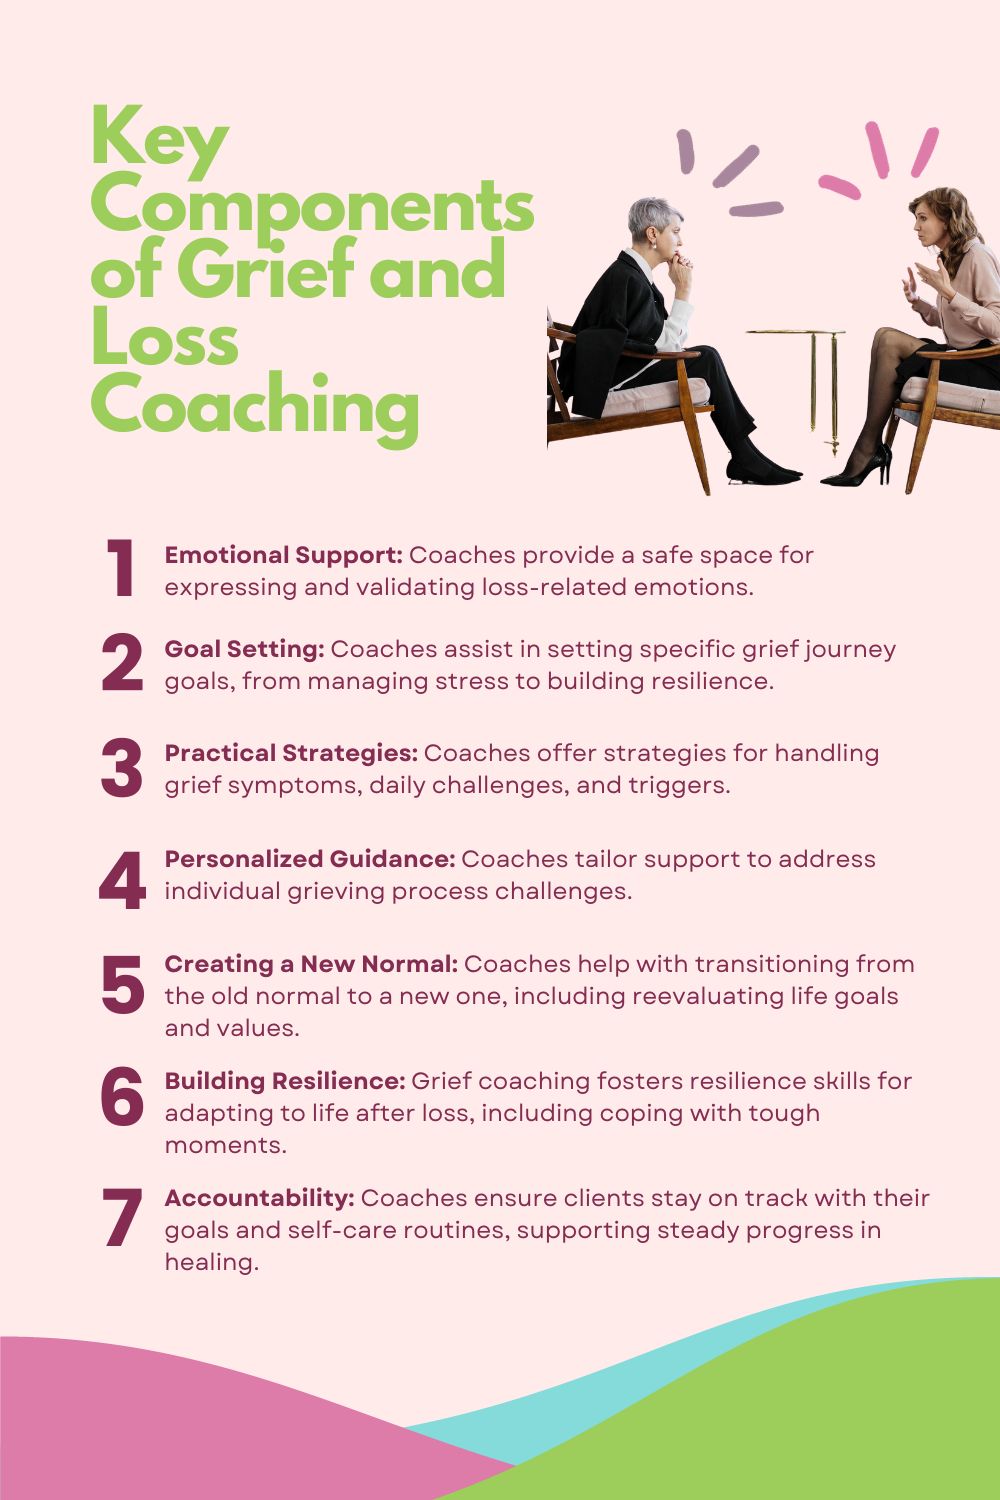 What is greif and loss coaching, key components